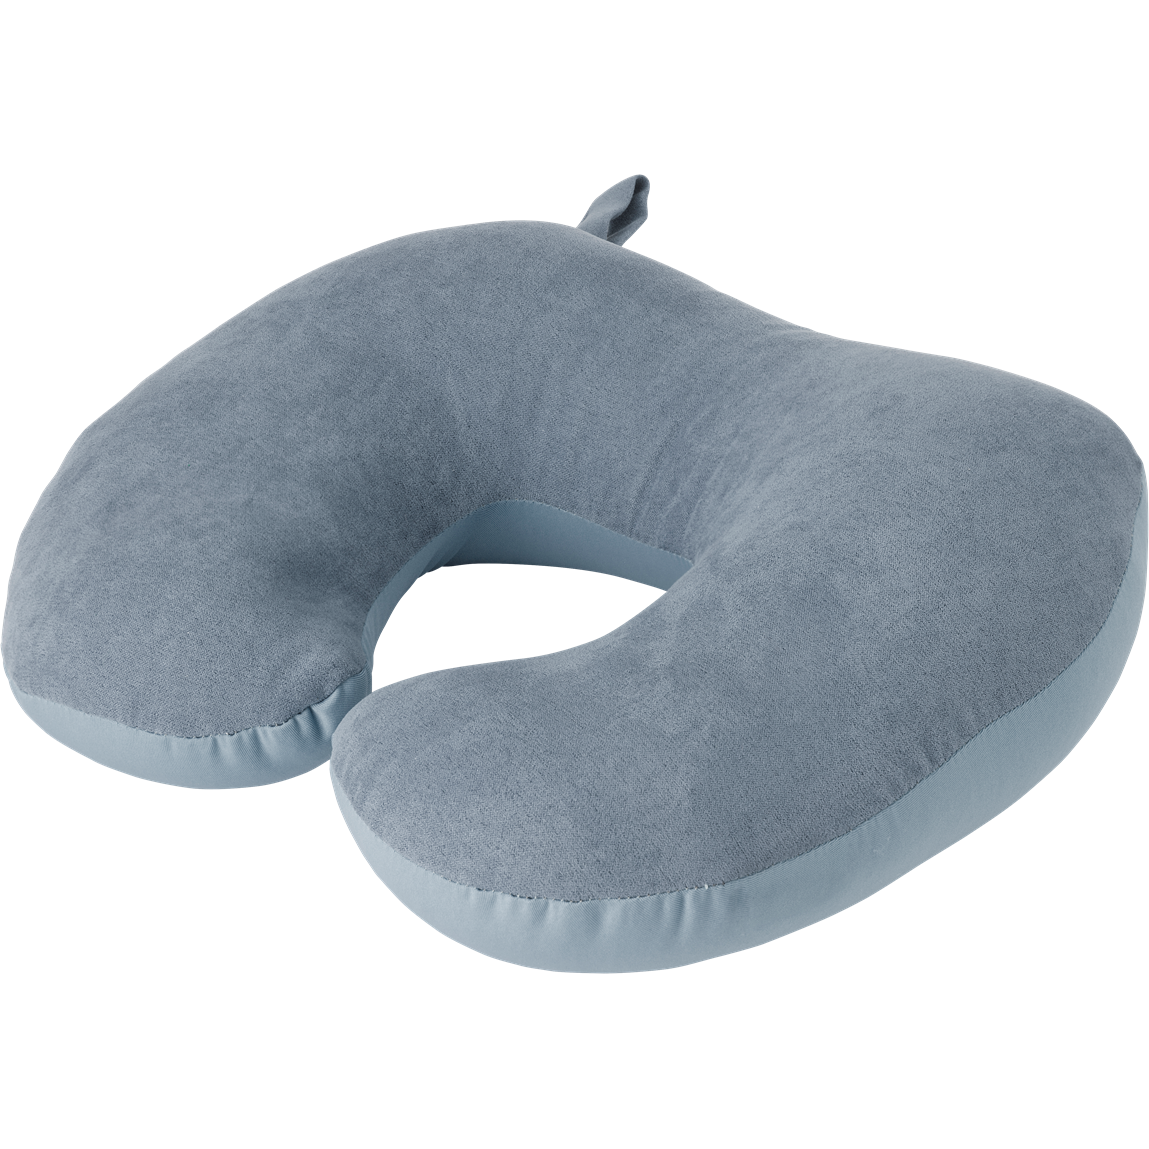 2-in-1 Travel Pillow Travel Accessories Grey  